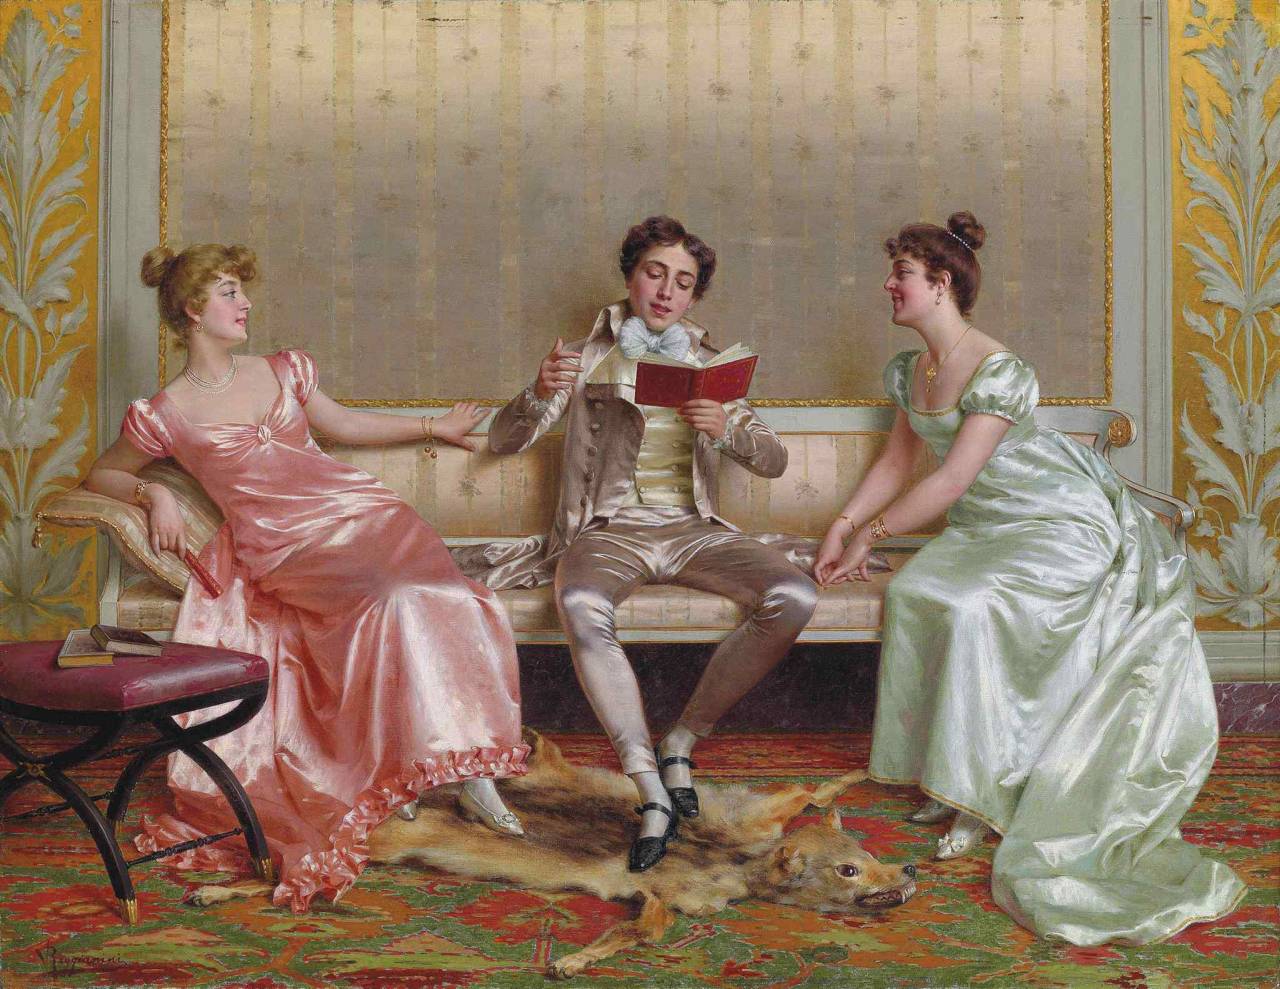 The Reading. Vittorio Reggianini (Italian, 1858-1939). Oil on canvas.
The wide and lasting appeal of Reggianini’s compositions comes from his sharp eye for detail, combined with subtle romantic narratives, to create lively, often humorous and...